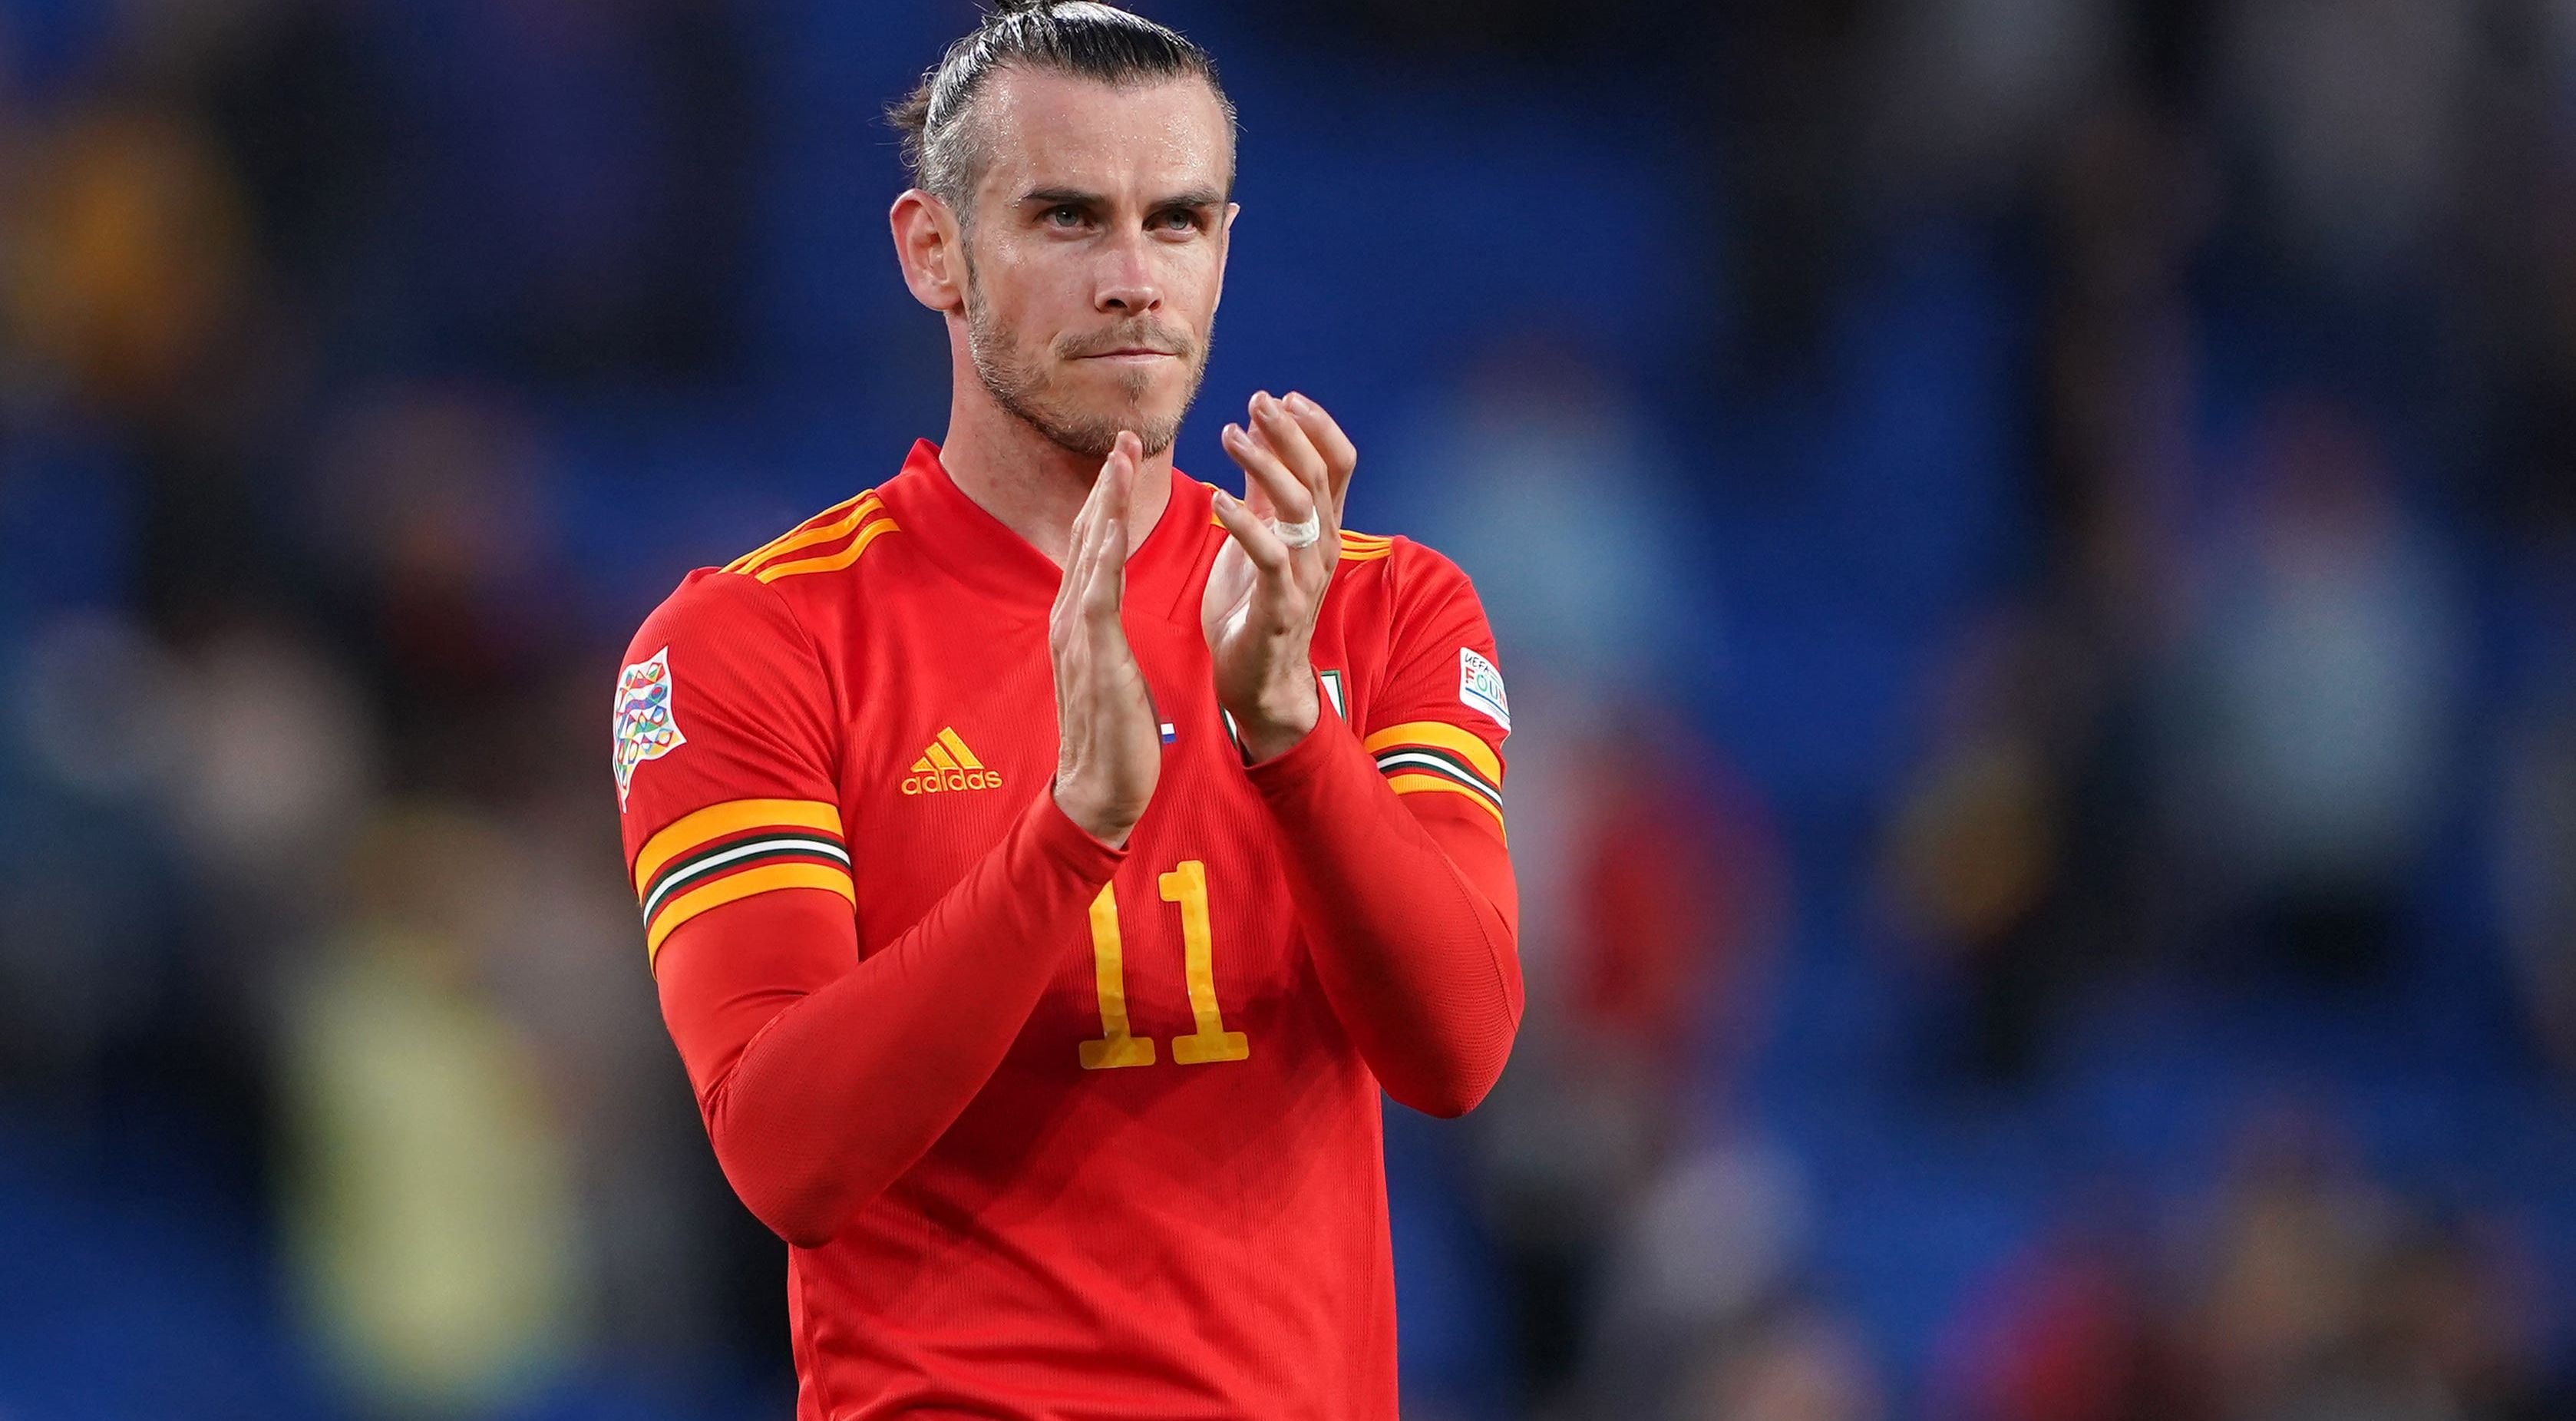 The Premier League and British football needs Gareth Bale back